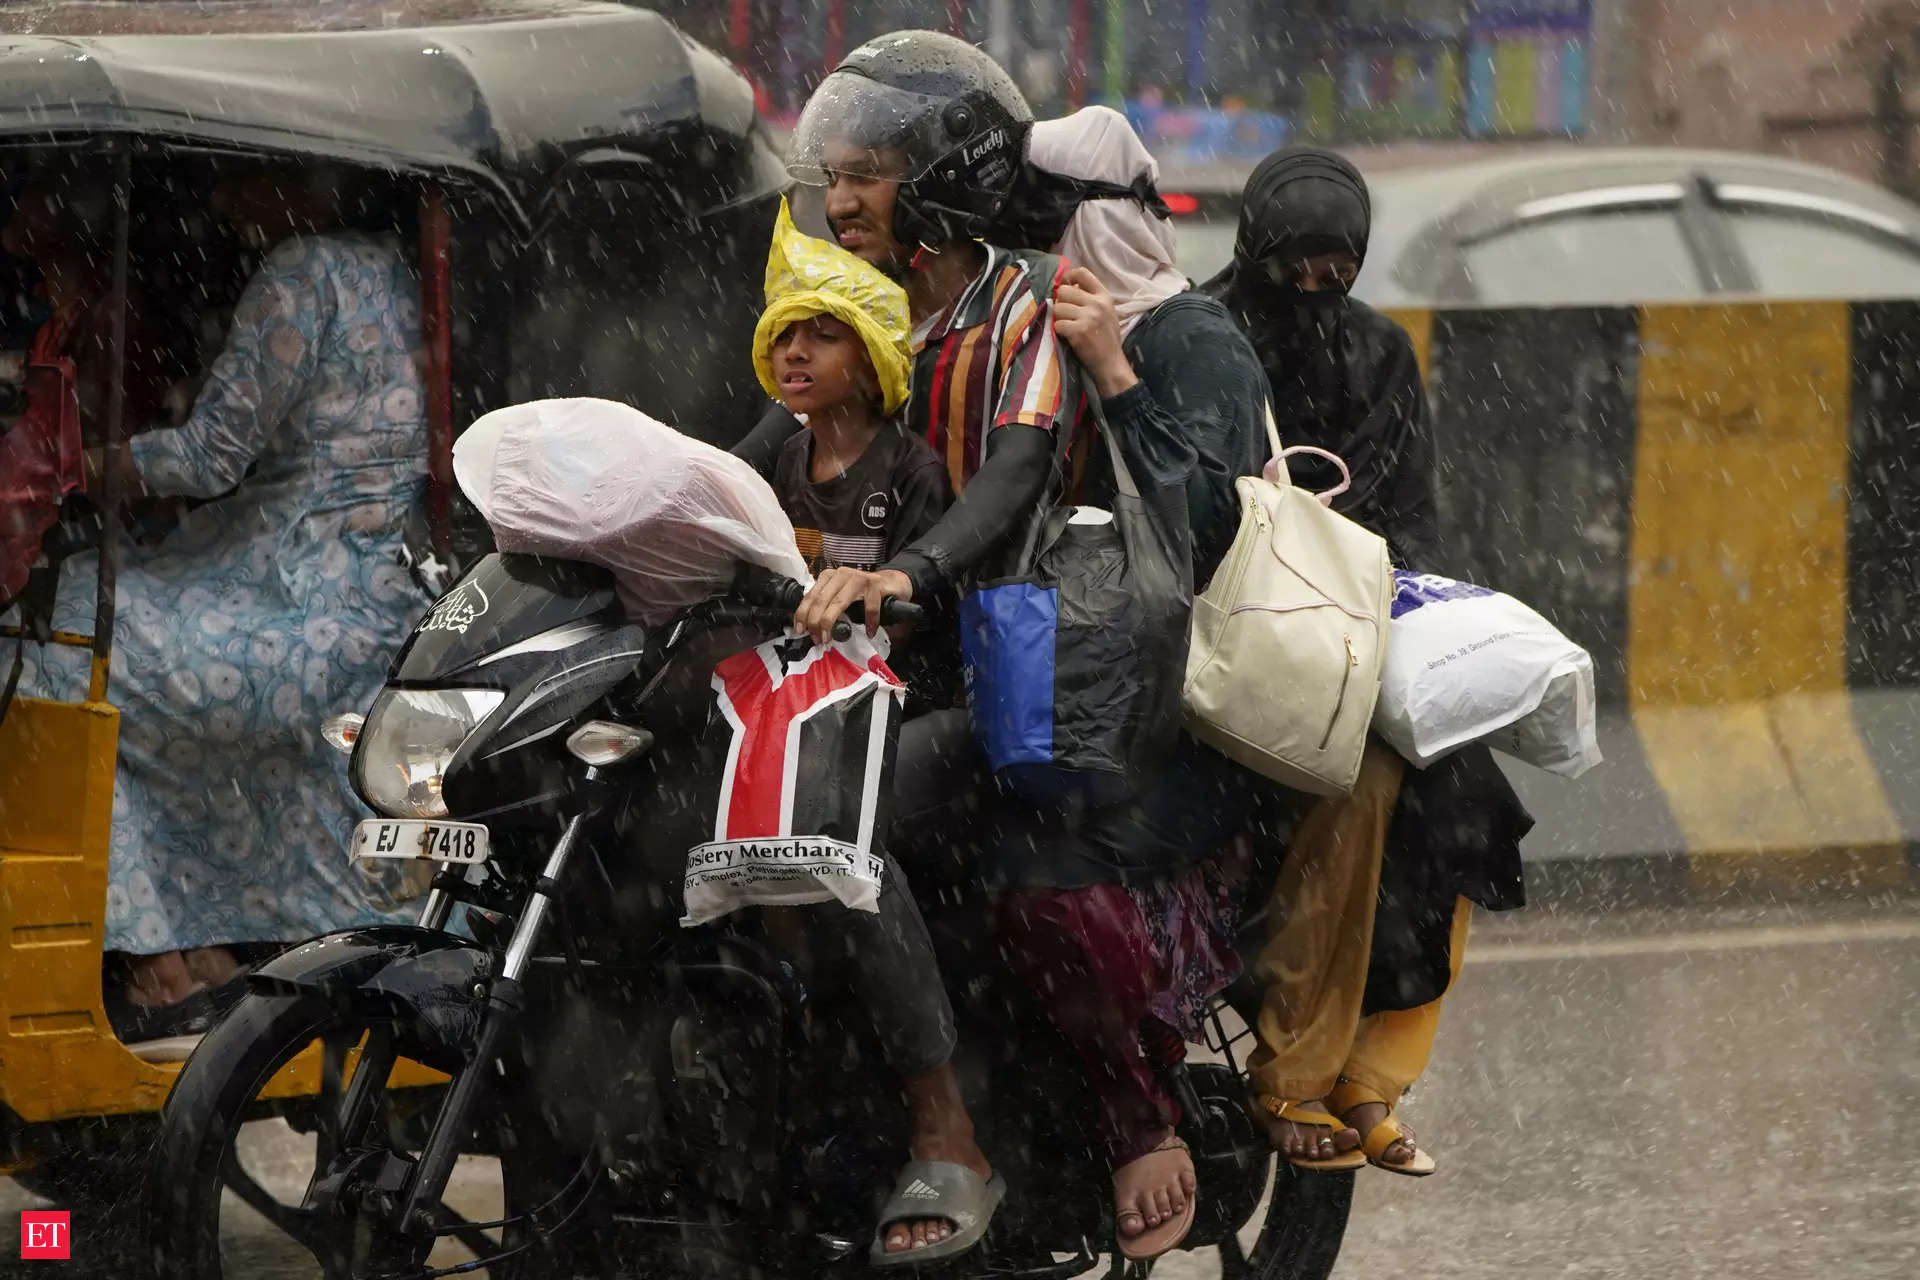 kerala monsoon news: Monsoon likely to hit Kerala four days late, expected  onset on June 4: IMD - The Economic Times